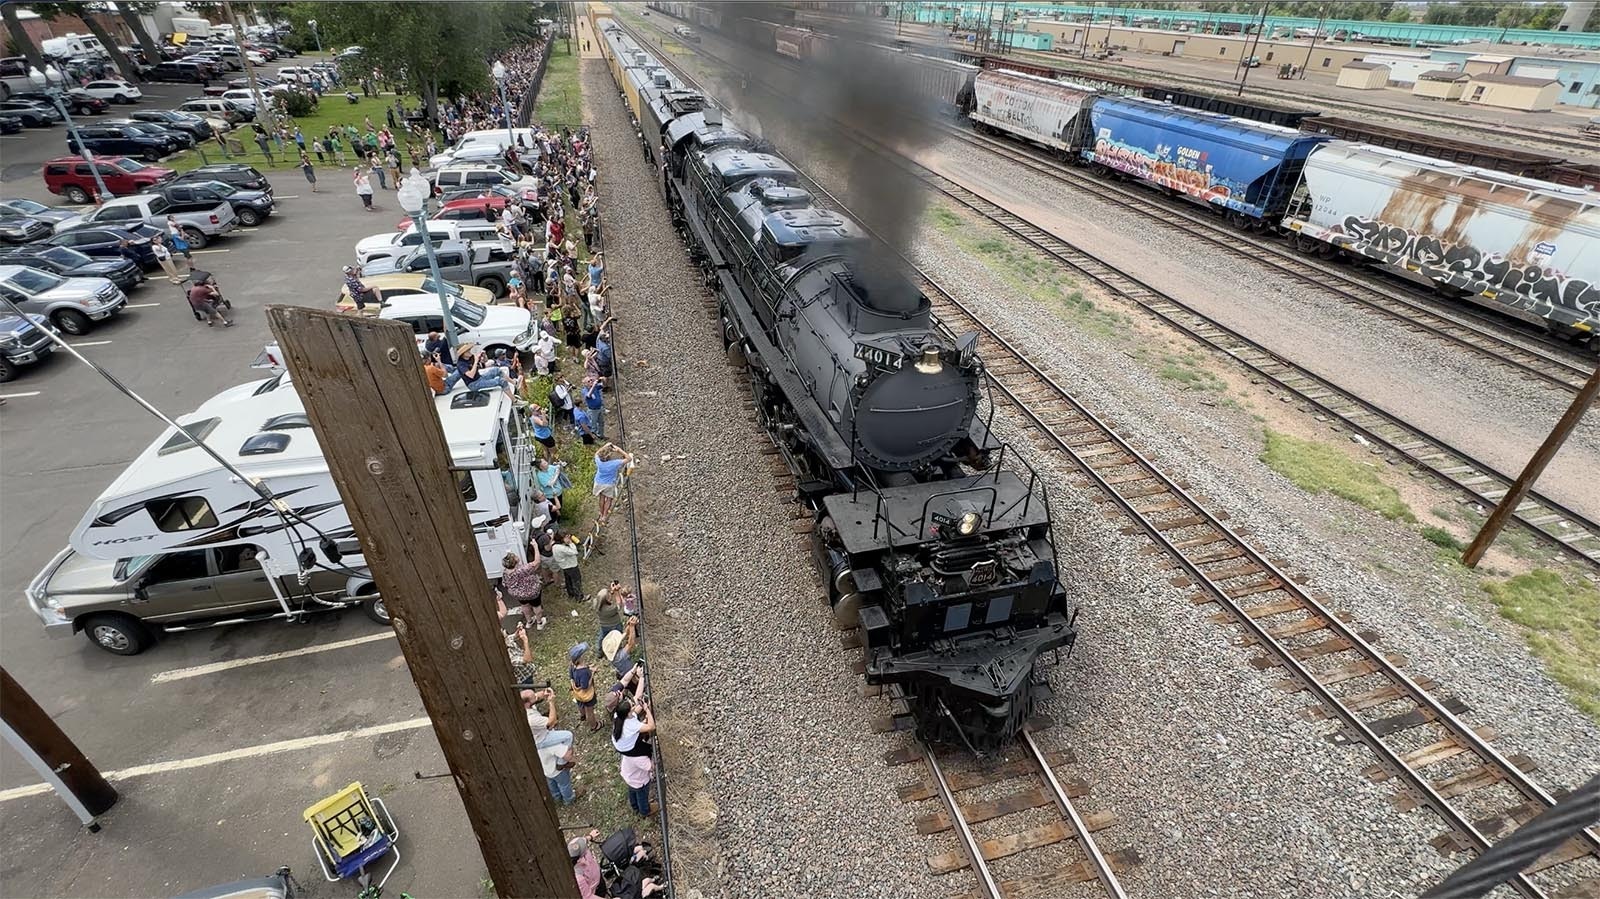 Big Boy 4014 makes the first stop on its 2024 summer tour in Laramie, Wyoming, on Sunday morning, June 30, 2024. Hundreds of curious people and serious train buffs waited for more than two hours to get a good viewing spot.,